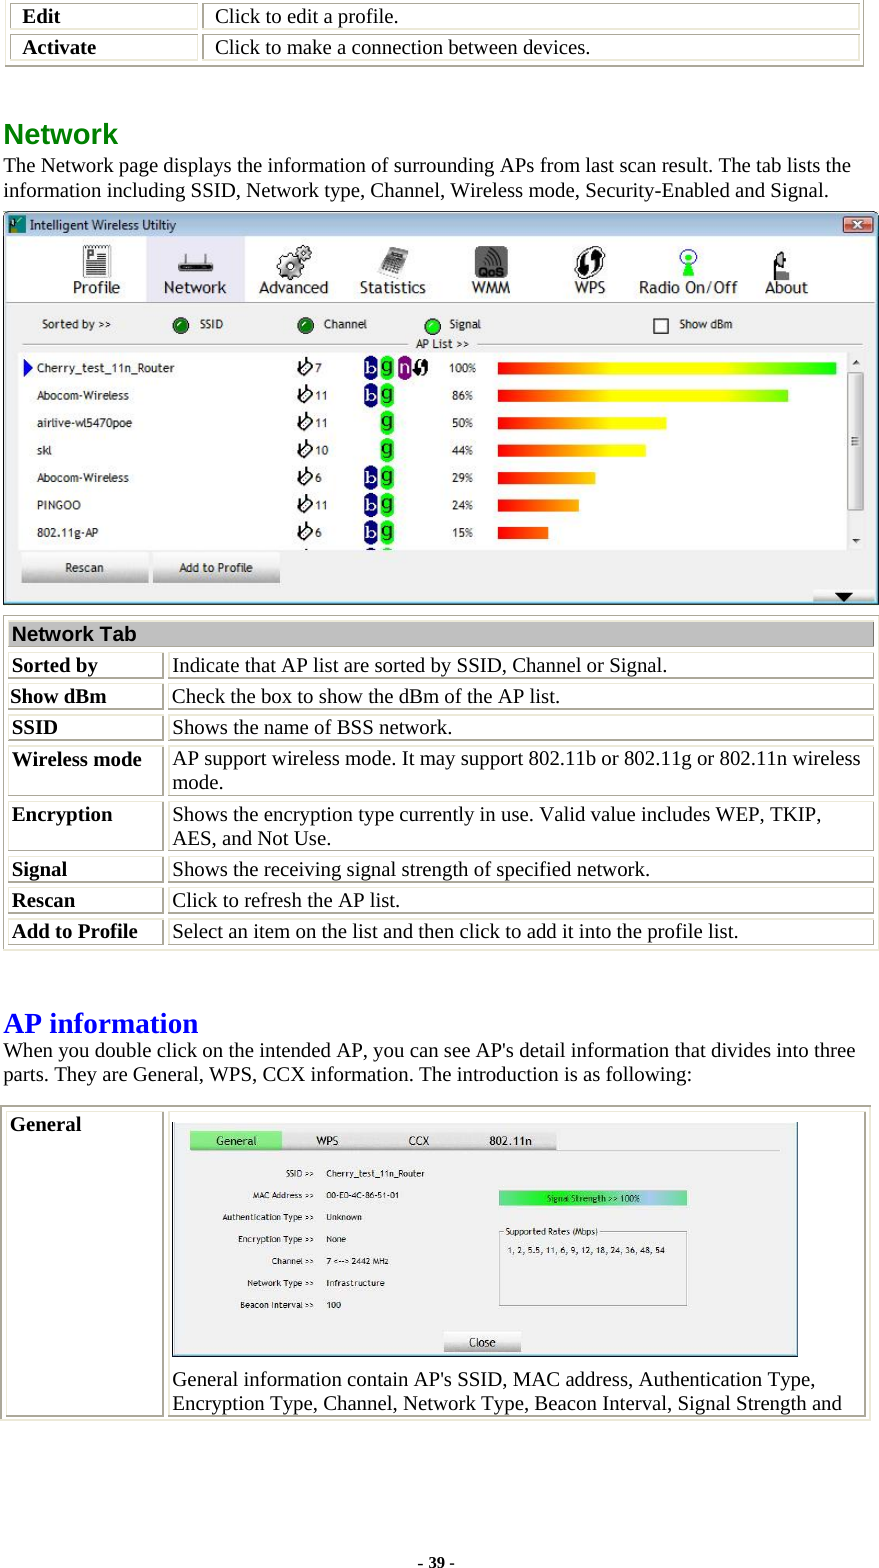  Edit  Click to edit a profile. Activate  Click to make a connection between devices.  Network  The Network page displays the information of surrounding APs from last scan result. The tab lists the information including SSID, Network type, Channel, Wireless mode, Security-Enabled and Signal.  Network Tab Sorted by Indicate that AP list are sorted by SSID, Channel or Signal. Show dBm  Check the box to show the dBm of the AP list. SSID  Shows the name of BSS network. Wireless mode  AP support wireless mode. It may support 802.11b or 802.11g or 802.11n wireless mode. Encryption  Shows the encryption type currently in use. Valid value includes WEP, TKIP, AES, and Not Use. Signal  Shows the receiving signal strength of specified network. Rescan  Click to refresh the AP list. Add to Profile  Select an item on the list and then click to add it into the profile list.  AP information When you double click on the intended AP, you can see AP&apos;s detail information that divides into three parts. They are General, WPS, CCX information. The introduction is as following: General  General information contain AP&apos;s SSID, MAC address, Authentication Type, Encryption Type, Channel, Network Type, Beacon Interval, Signal Strength and - 39 - 